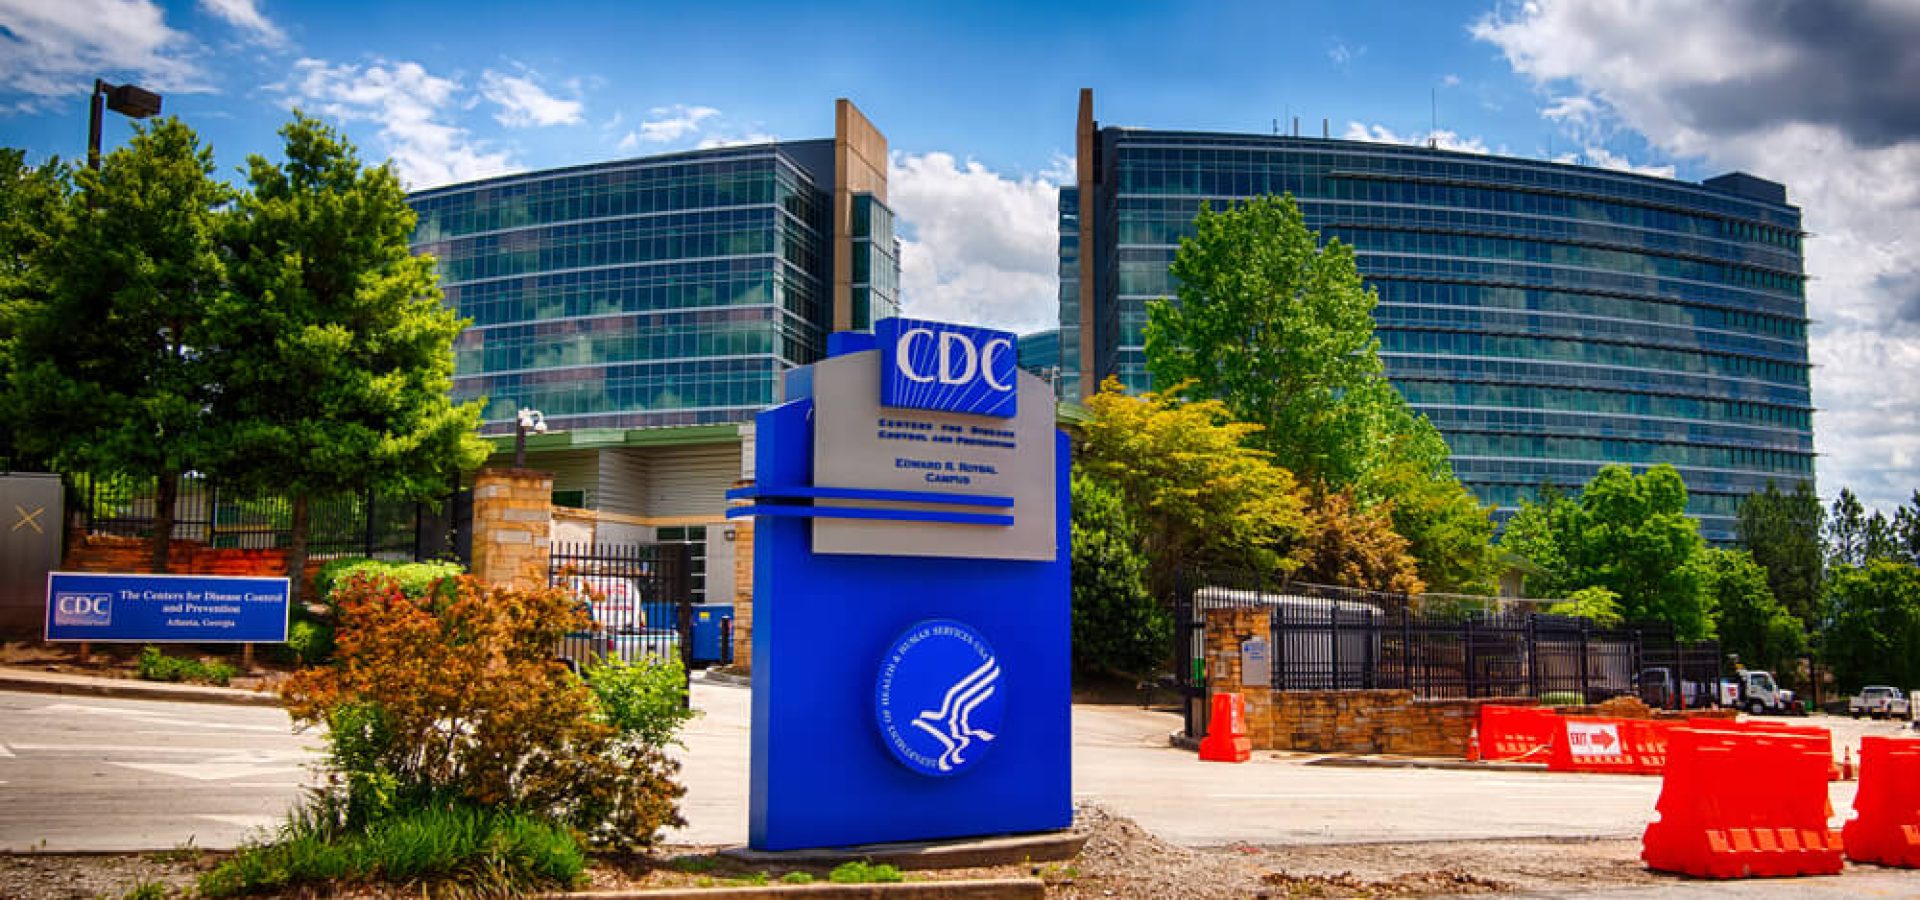 The U.S. Centers for Disease Control and Prevention